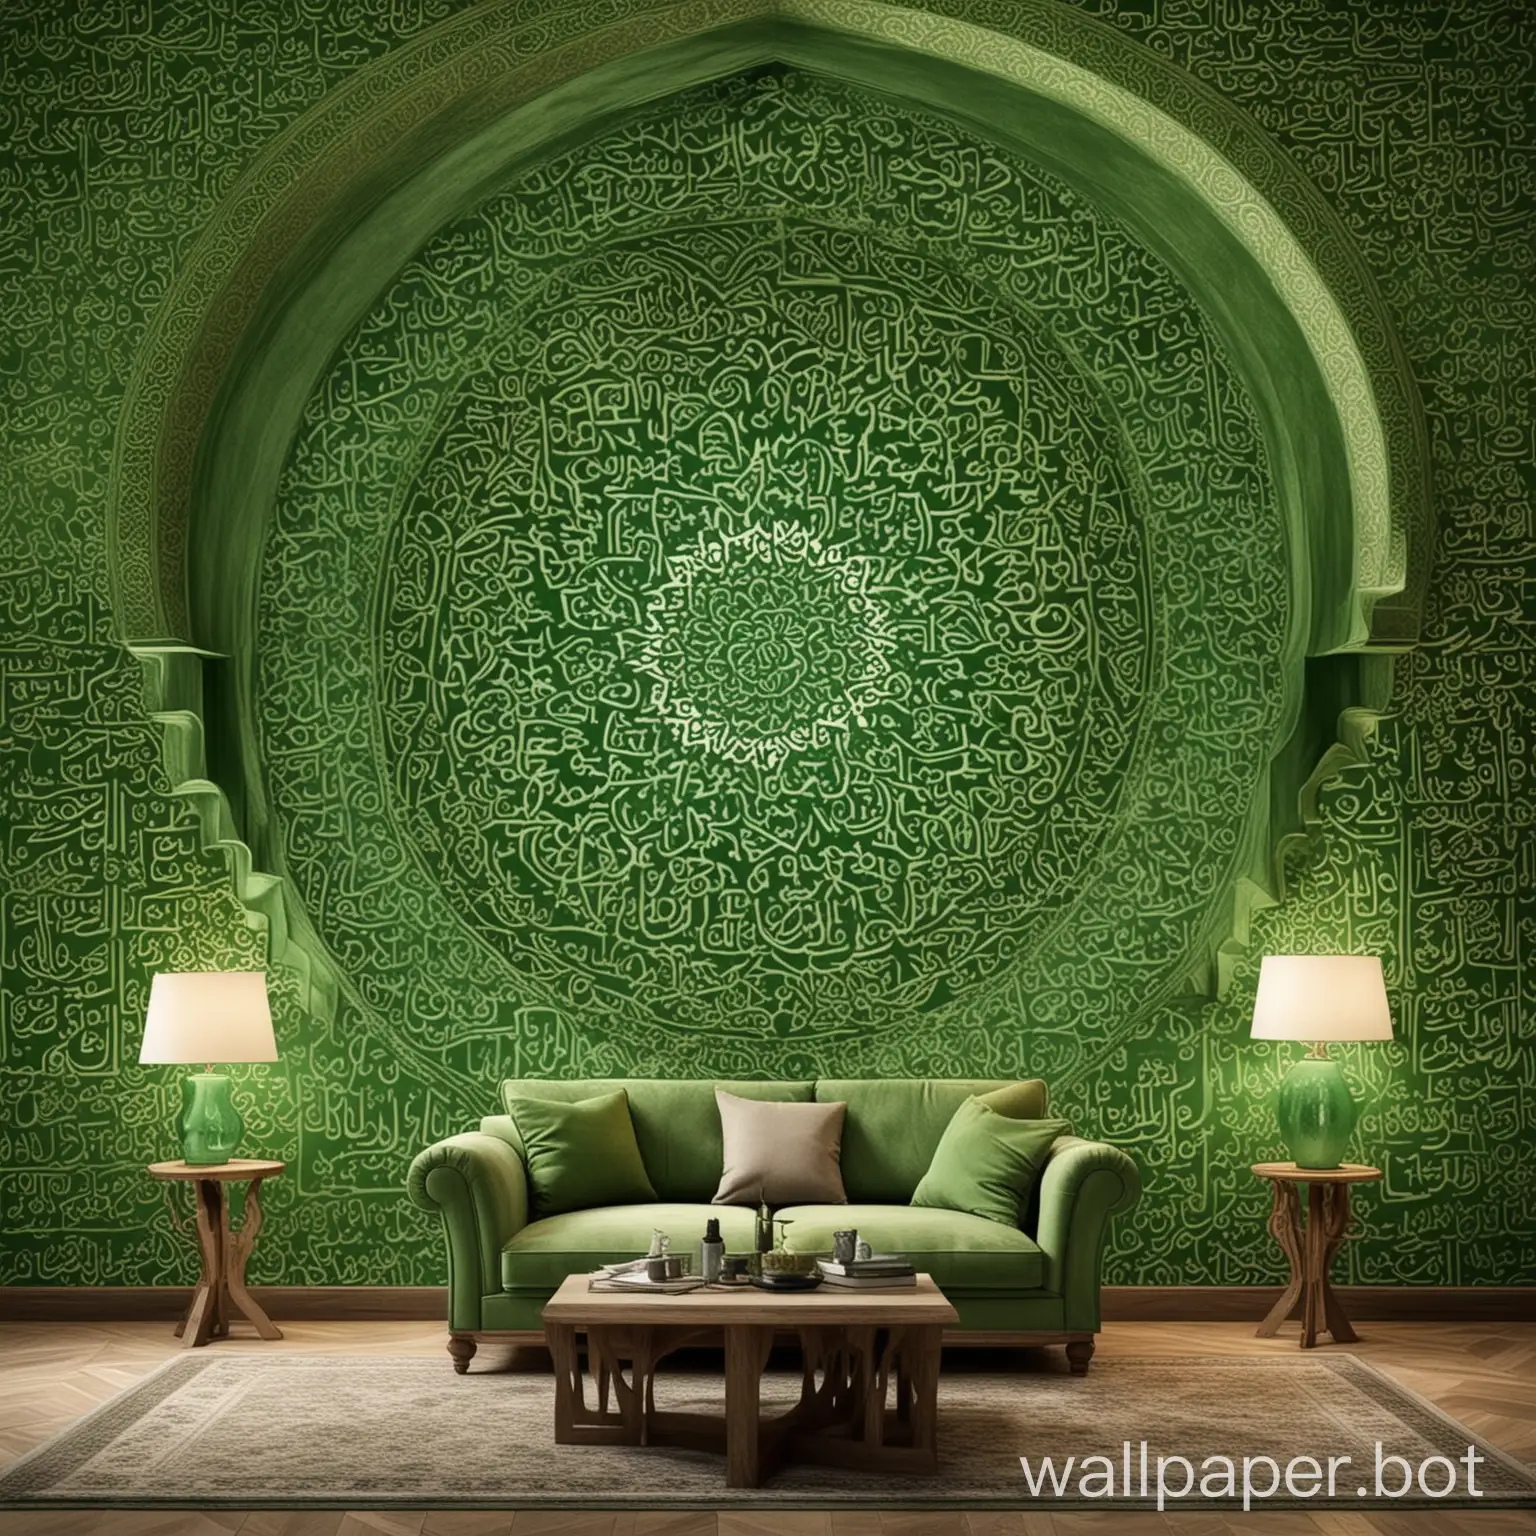 Islamic-Green-Wallpaper-Design-with-Dominant-Shades-of-Green